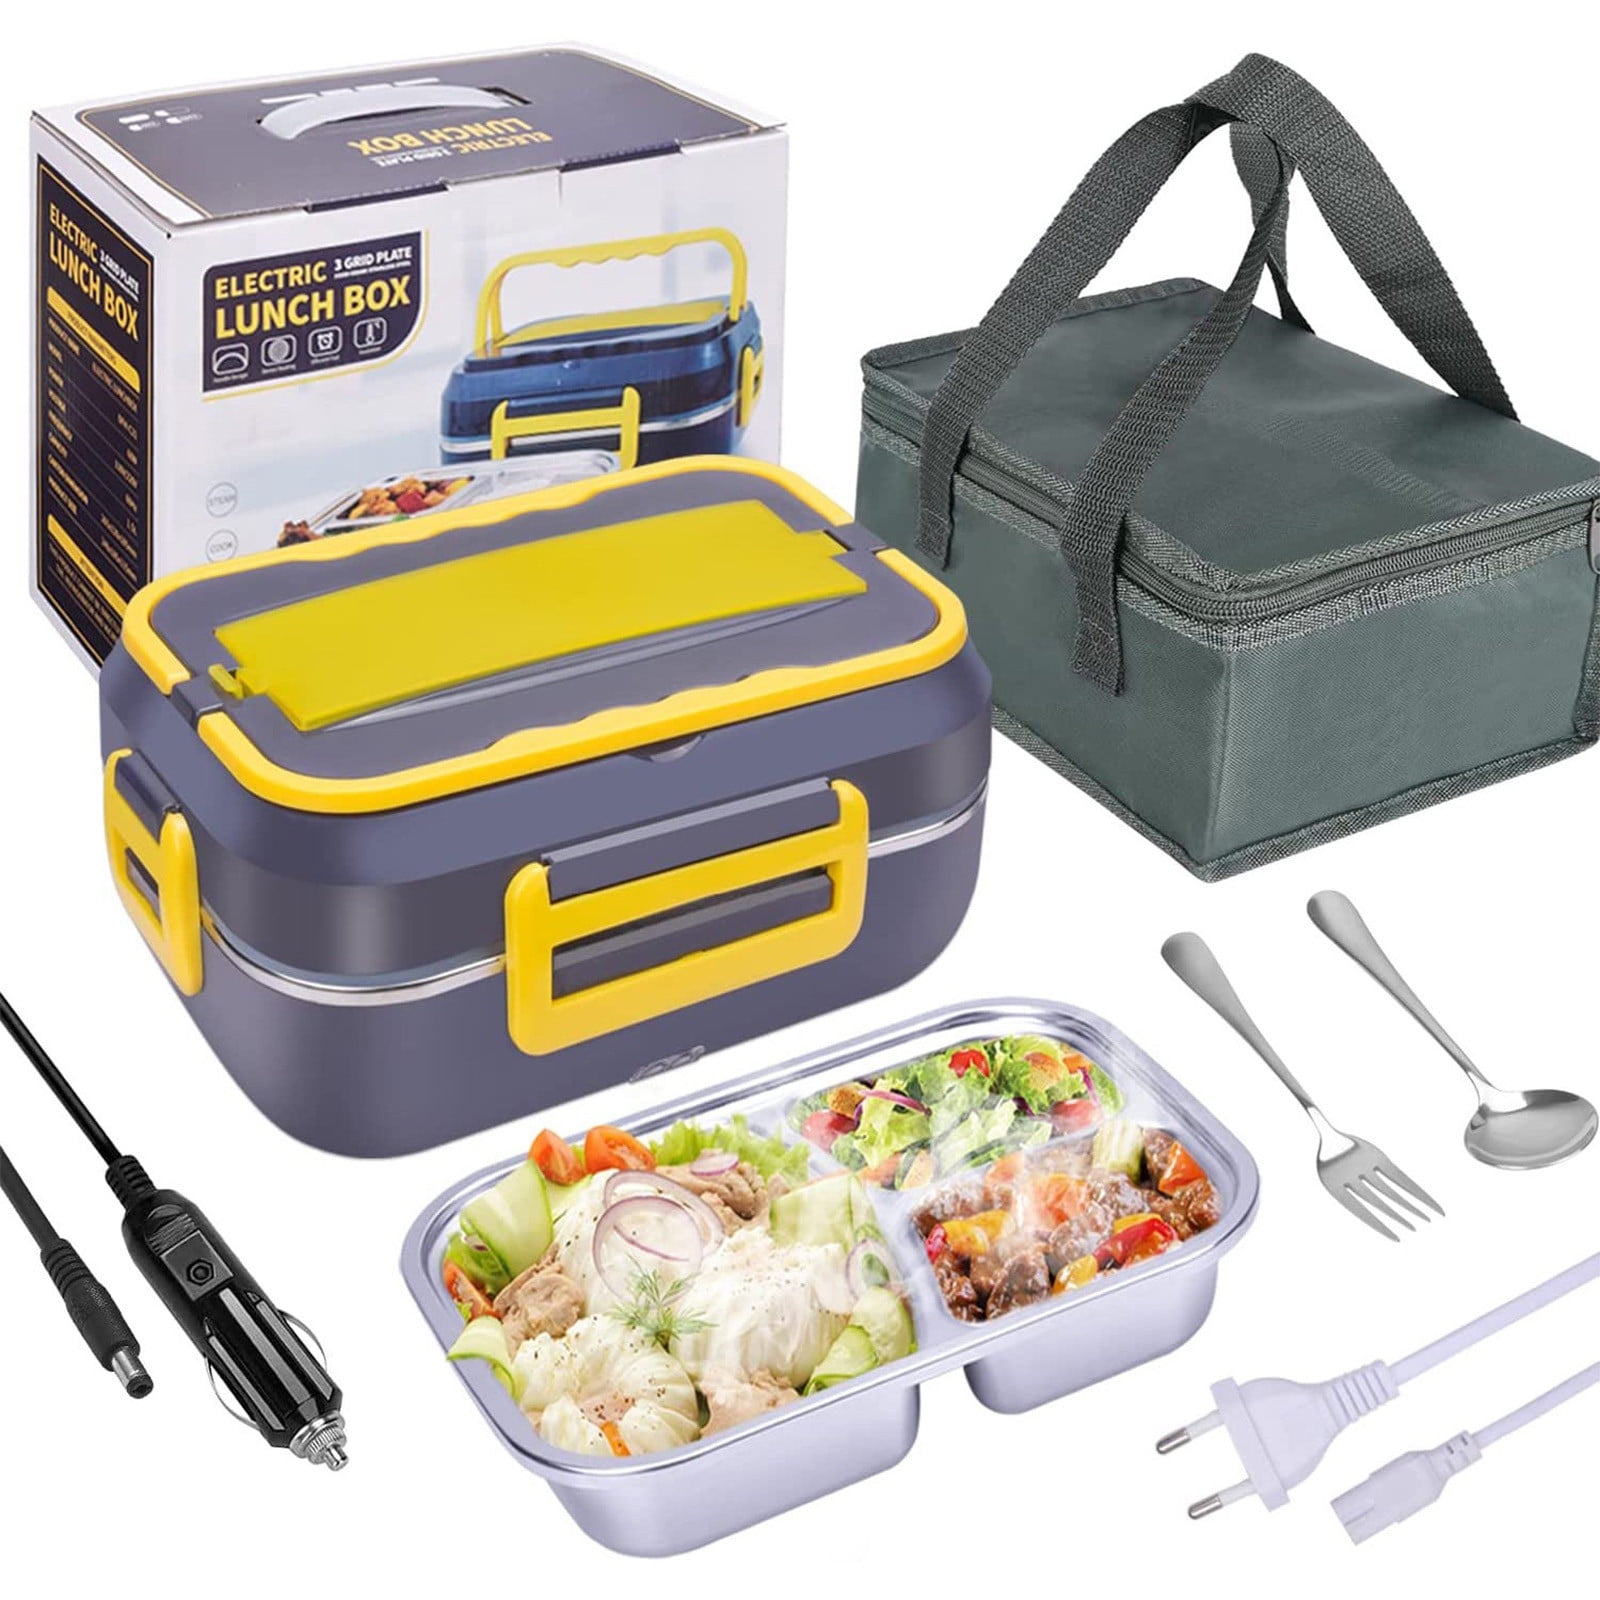 Sourcing Electric heating lunch box car stainless steel electric